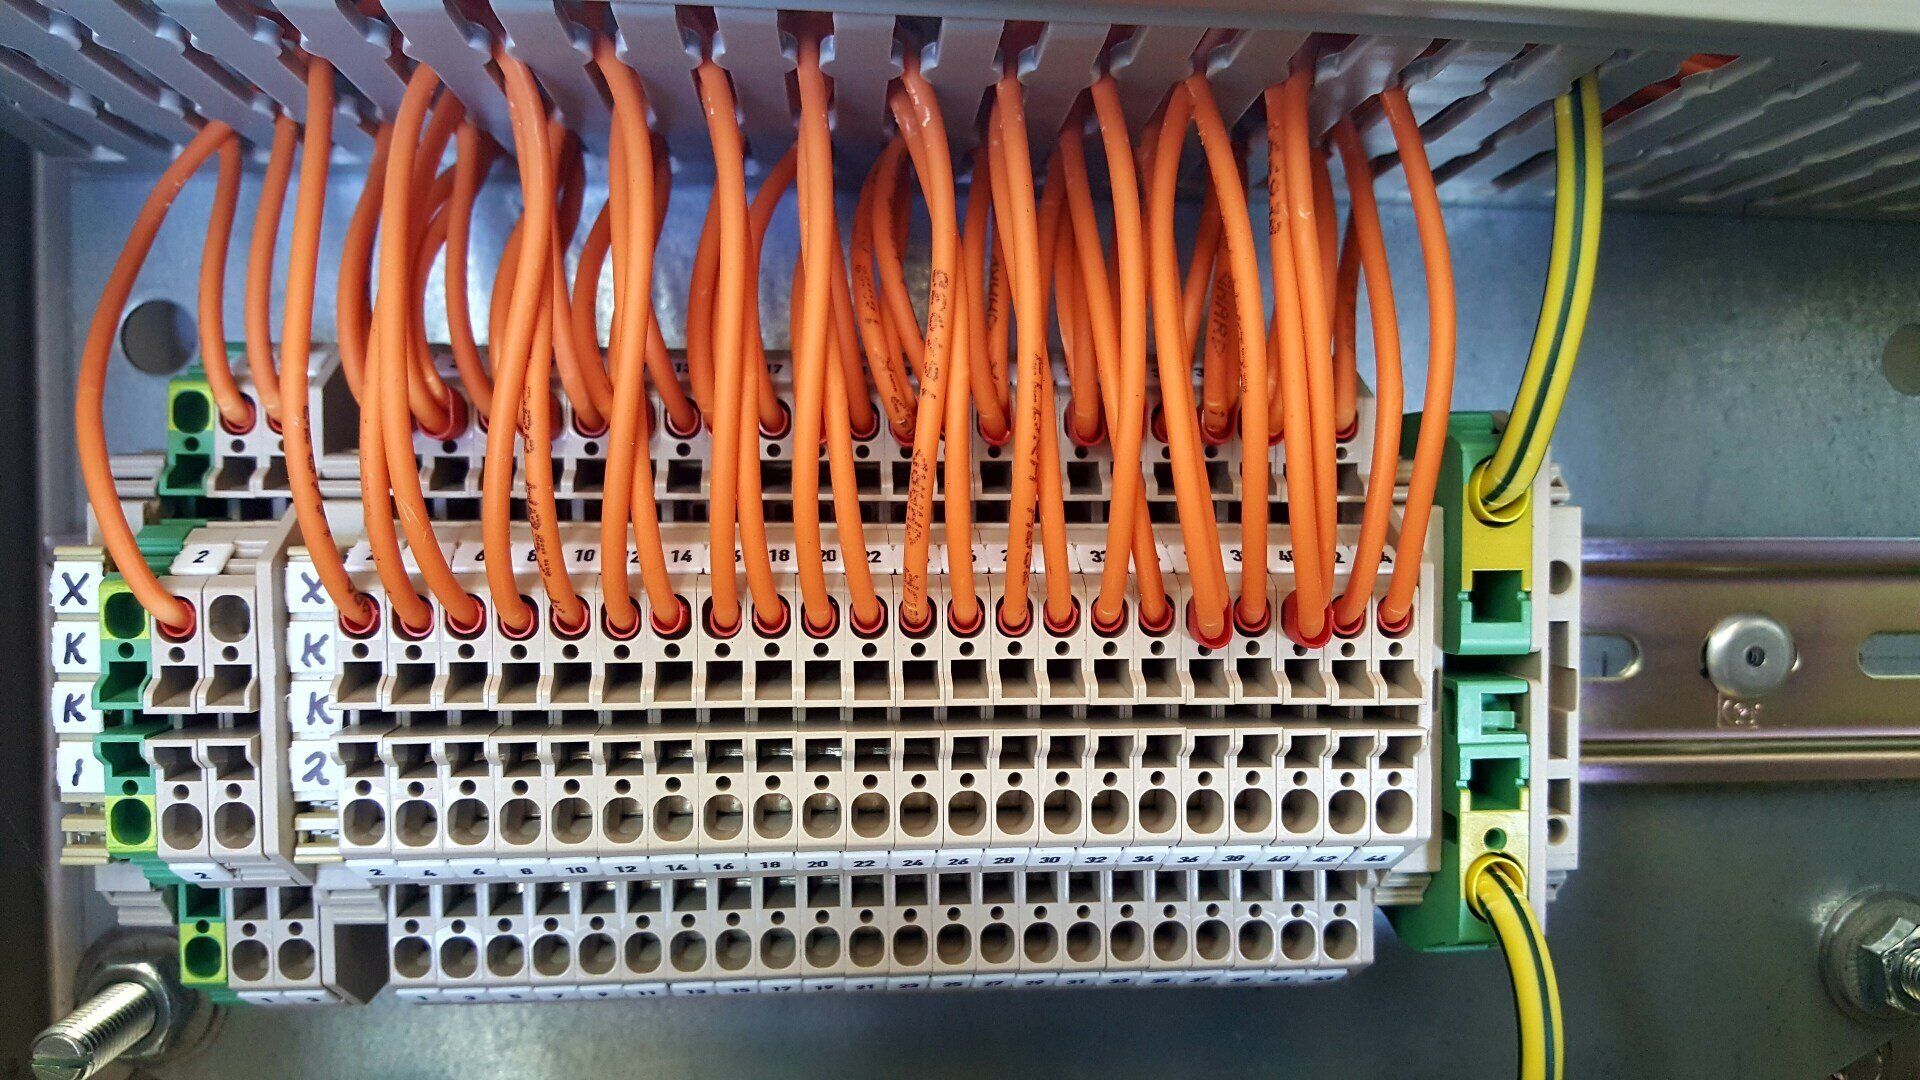 Electrical Switchboard With Orange Wires — Anytime Cairns Electrical in Cairns, QLD